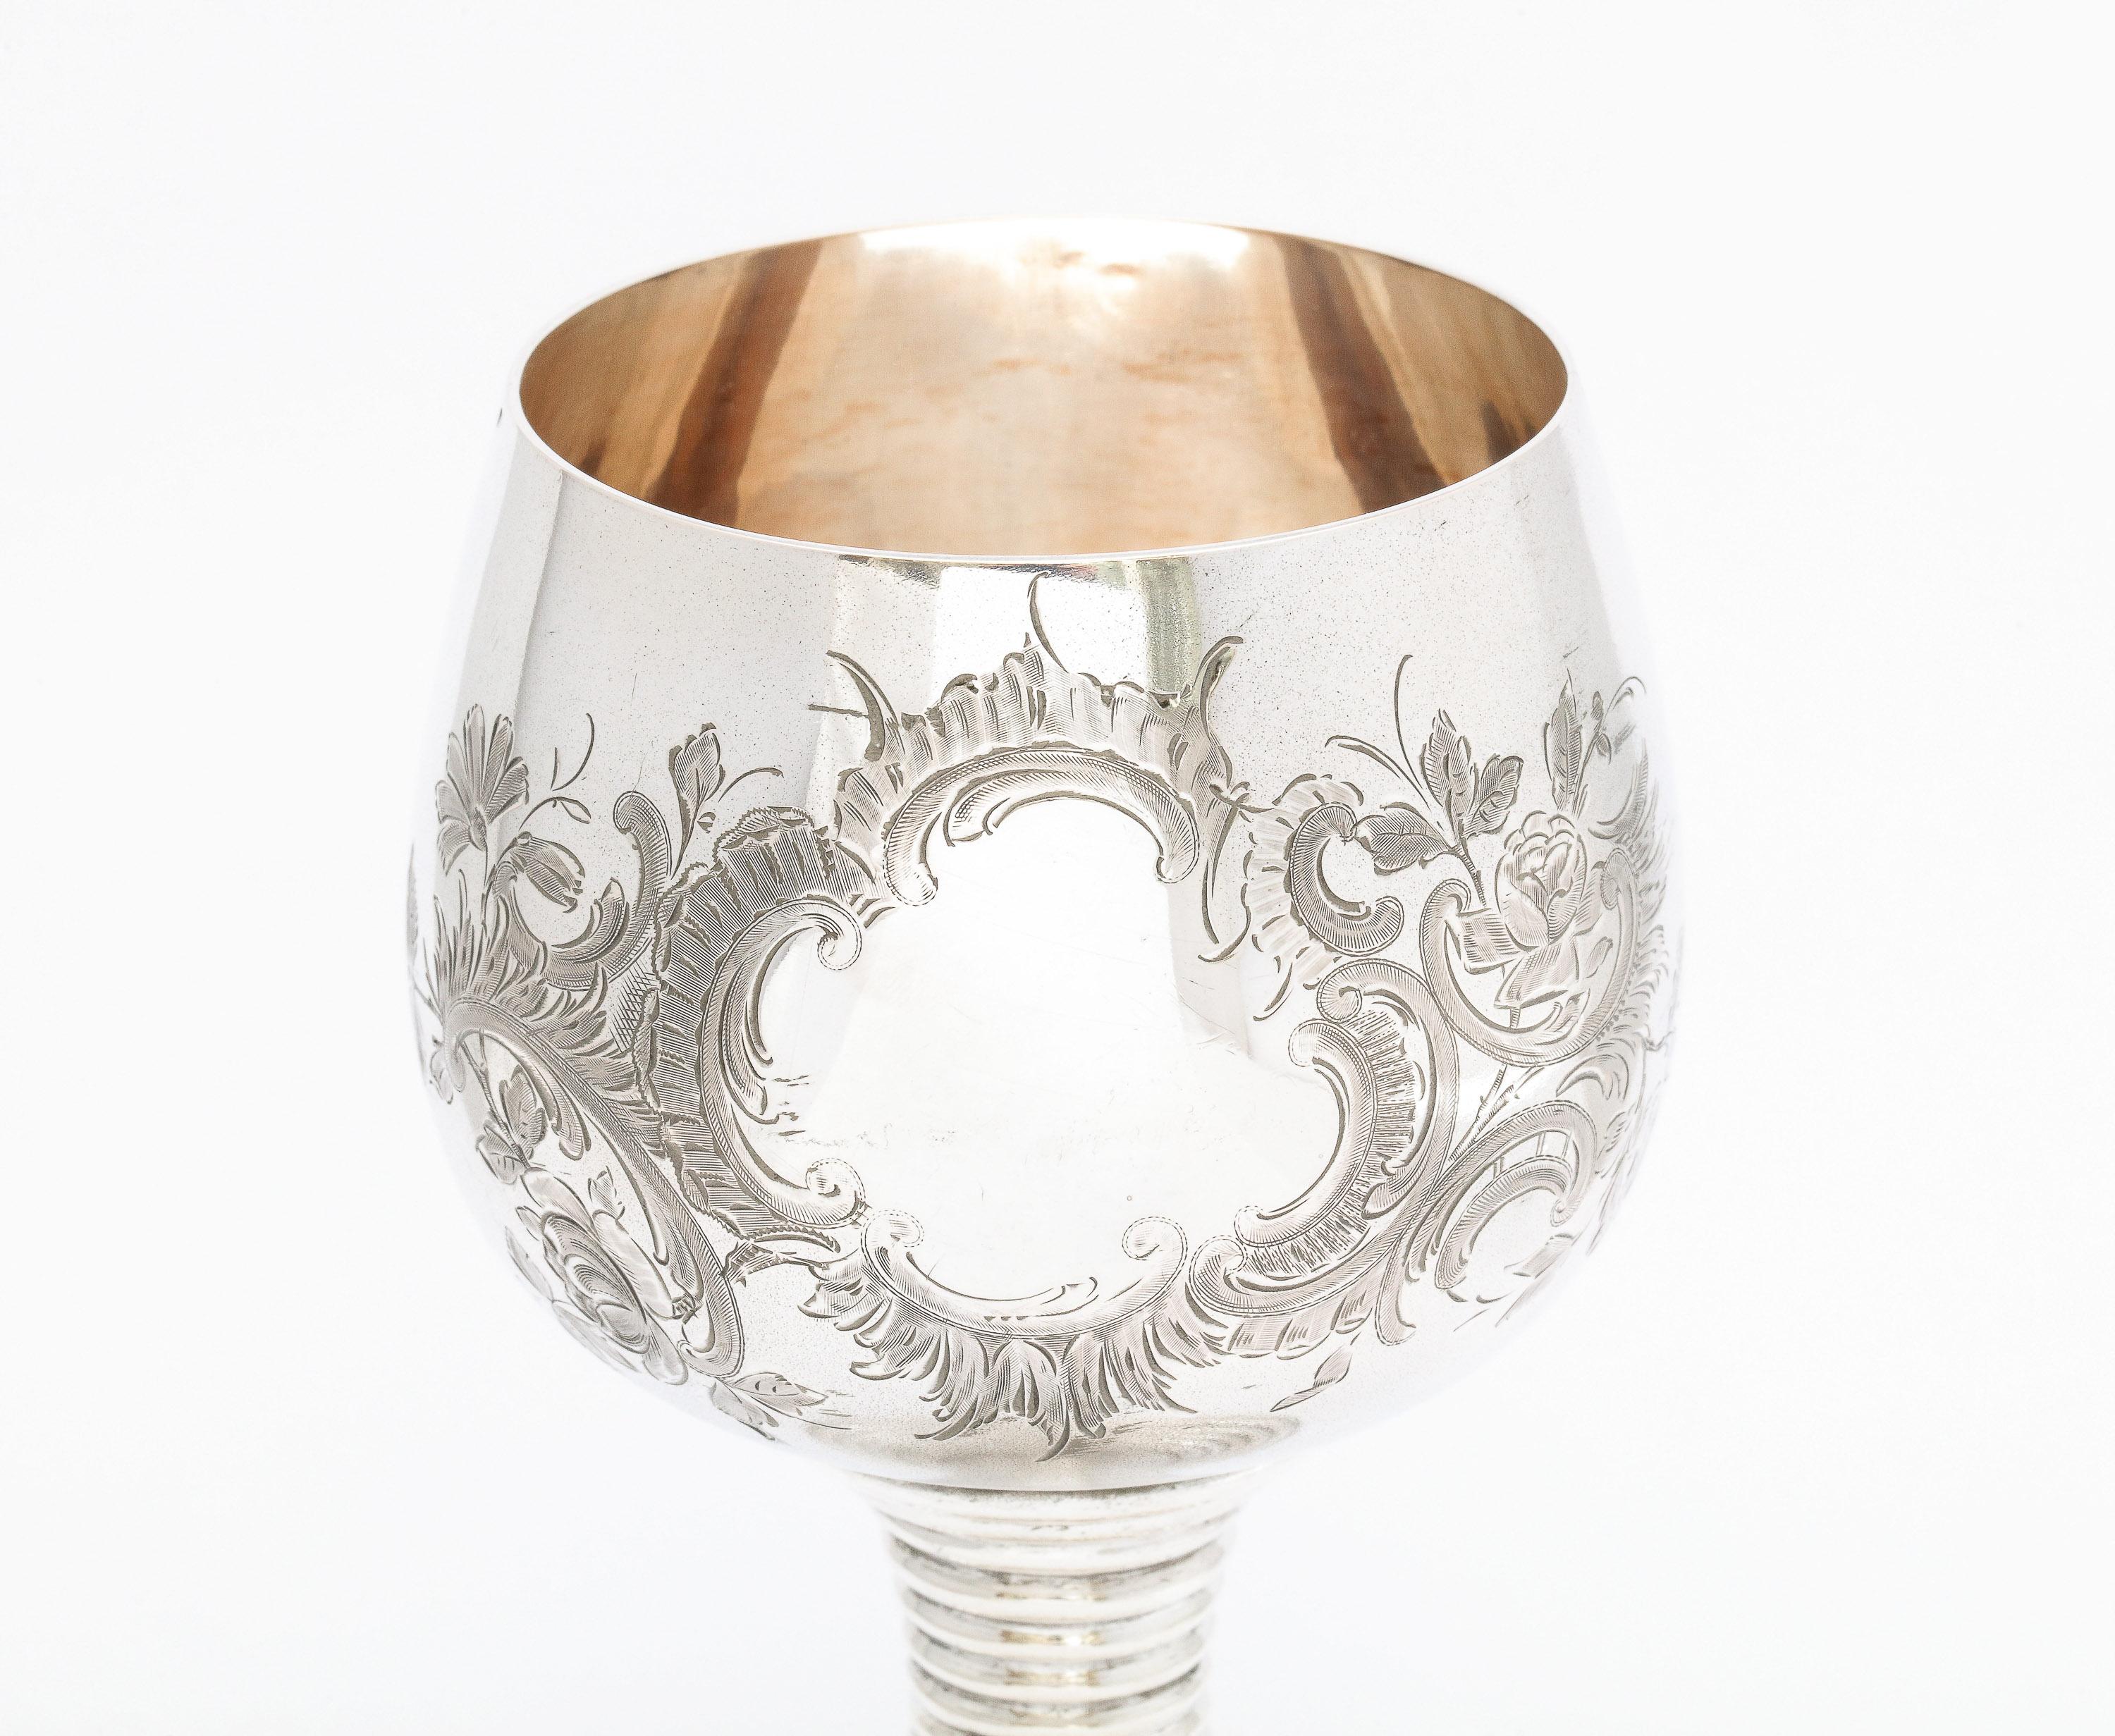 Medieval/15th Century-Style Continental Silver '.800' Roemer/ Rummer Goblet In Good Condition For Sale In New York, NY